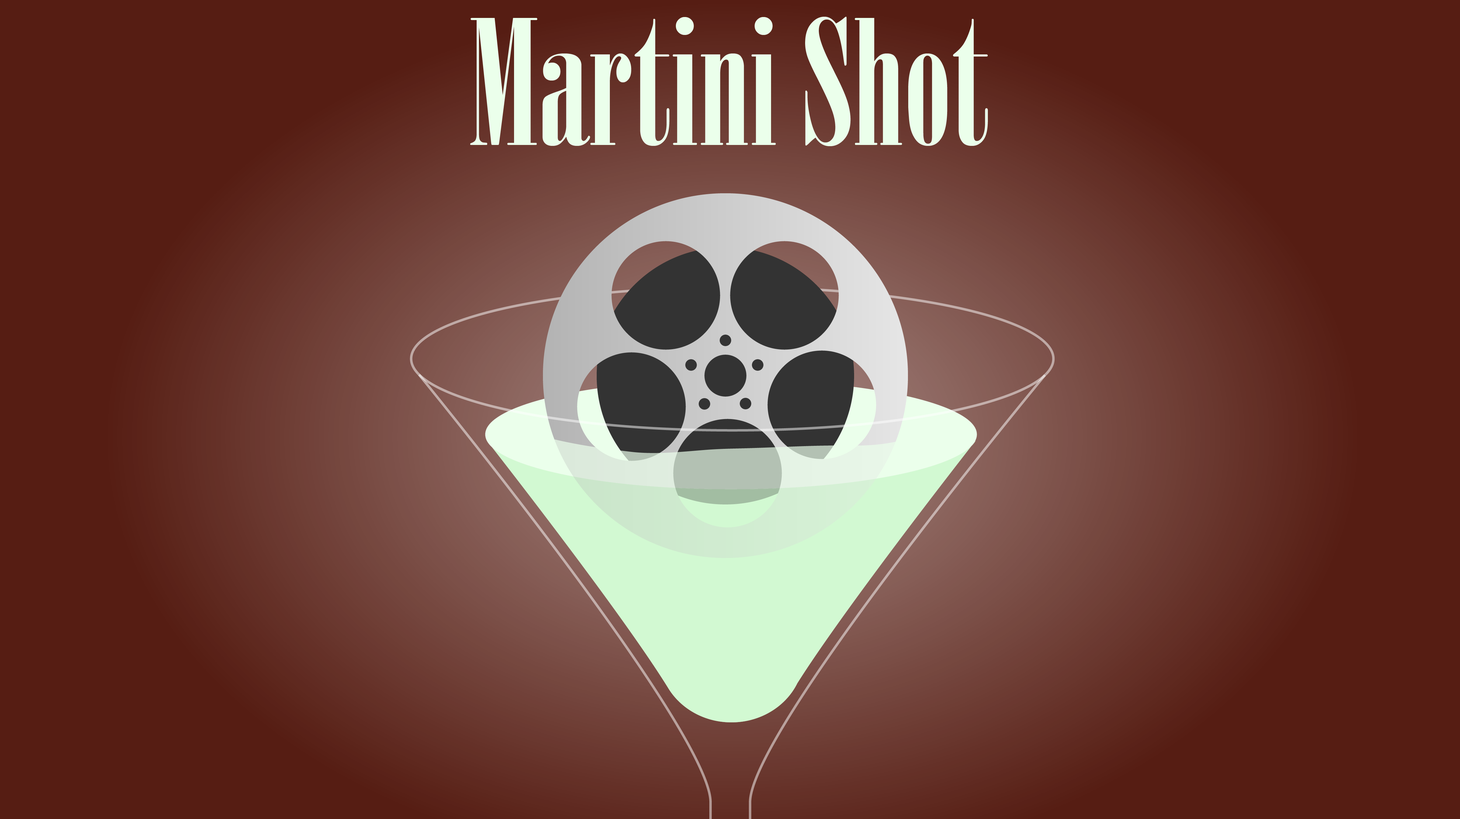 This is Rob Long and on today’s Martini Shot I am called courageous for doing something I had no choice but to do, and for doing something else I had no idea was risky in any way, so I’m not really courageous per se as much as cowardly and…